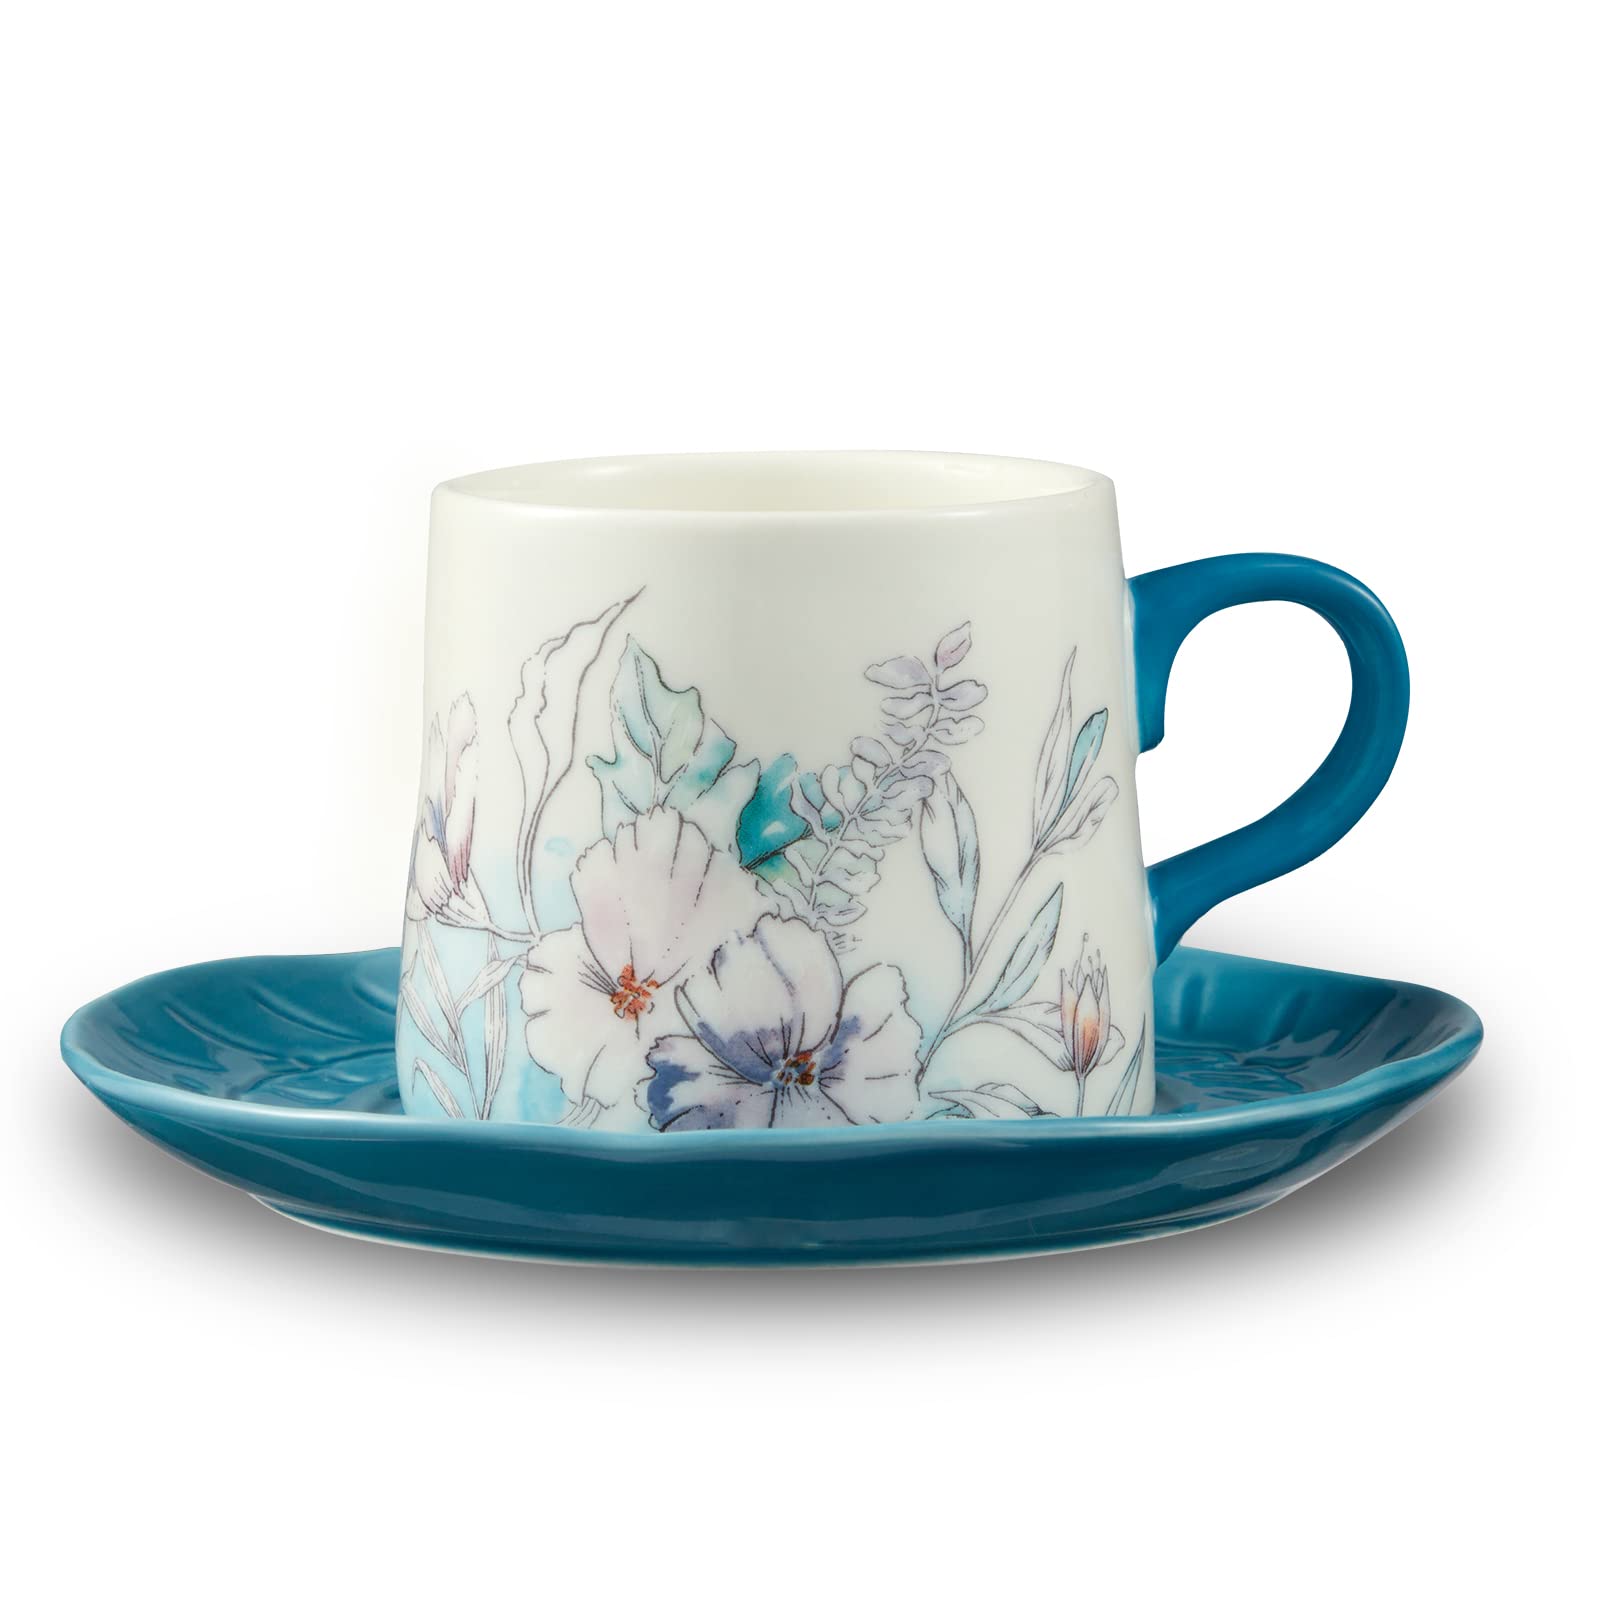 Coffee Cup and Saucer Set, 6.8oz/200ml Coffee Mugs, Handmade Blue Glazed Embossed Tea Cup with Blue and White Color Matching, Porcelain Tea Cup for Office and Home, Dishwasher and Microwave Safe